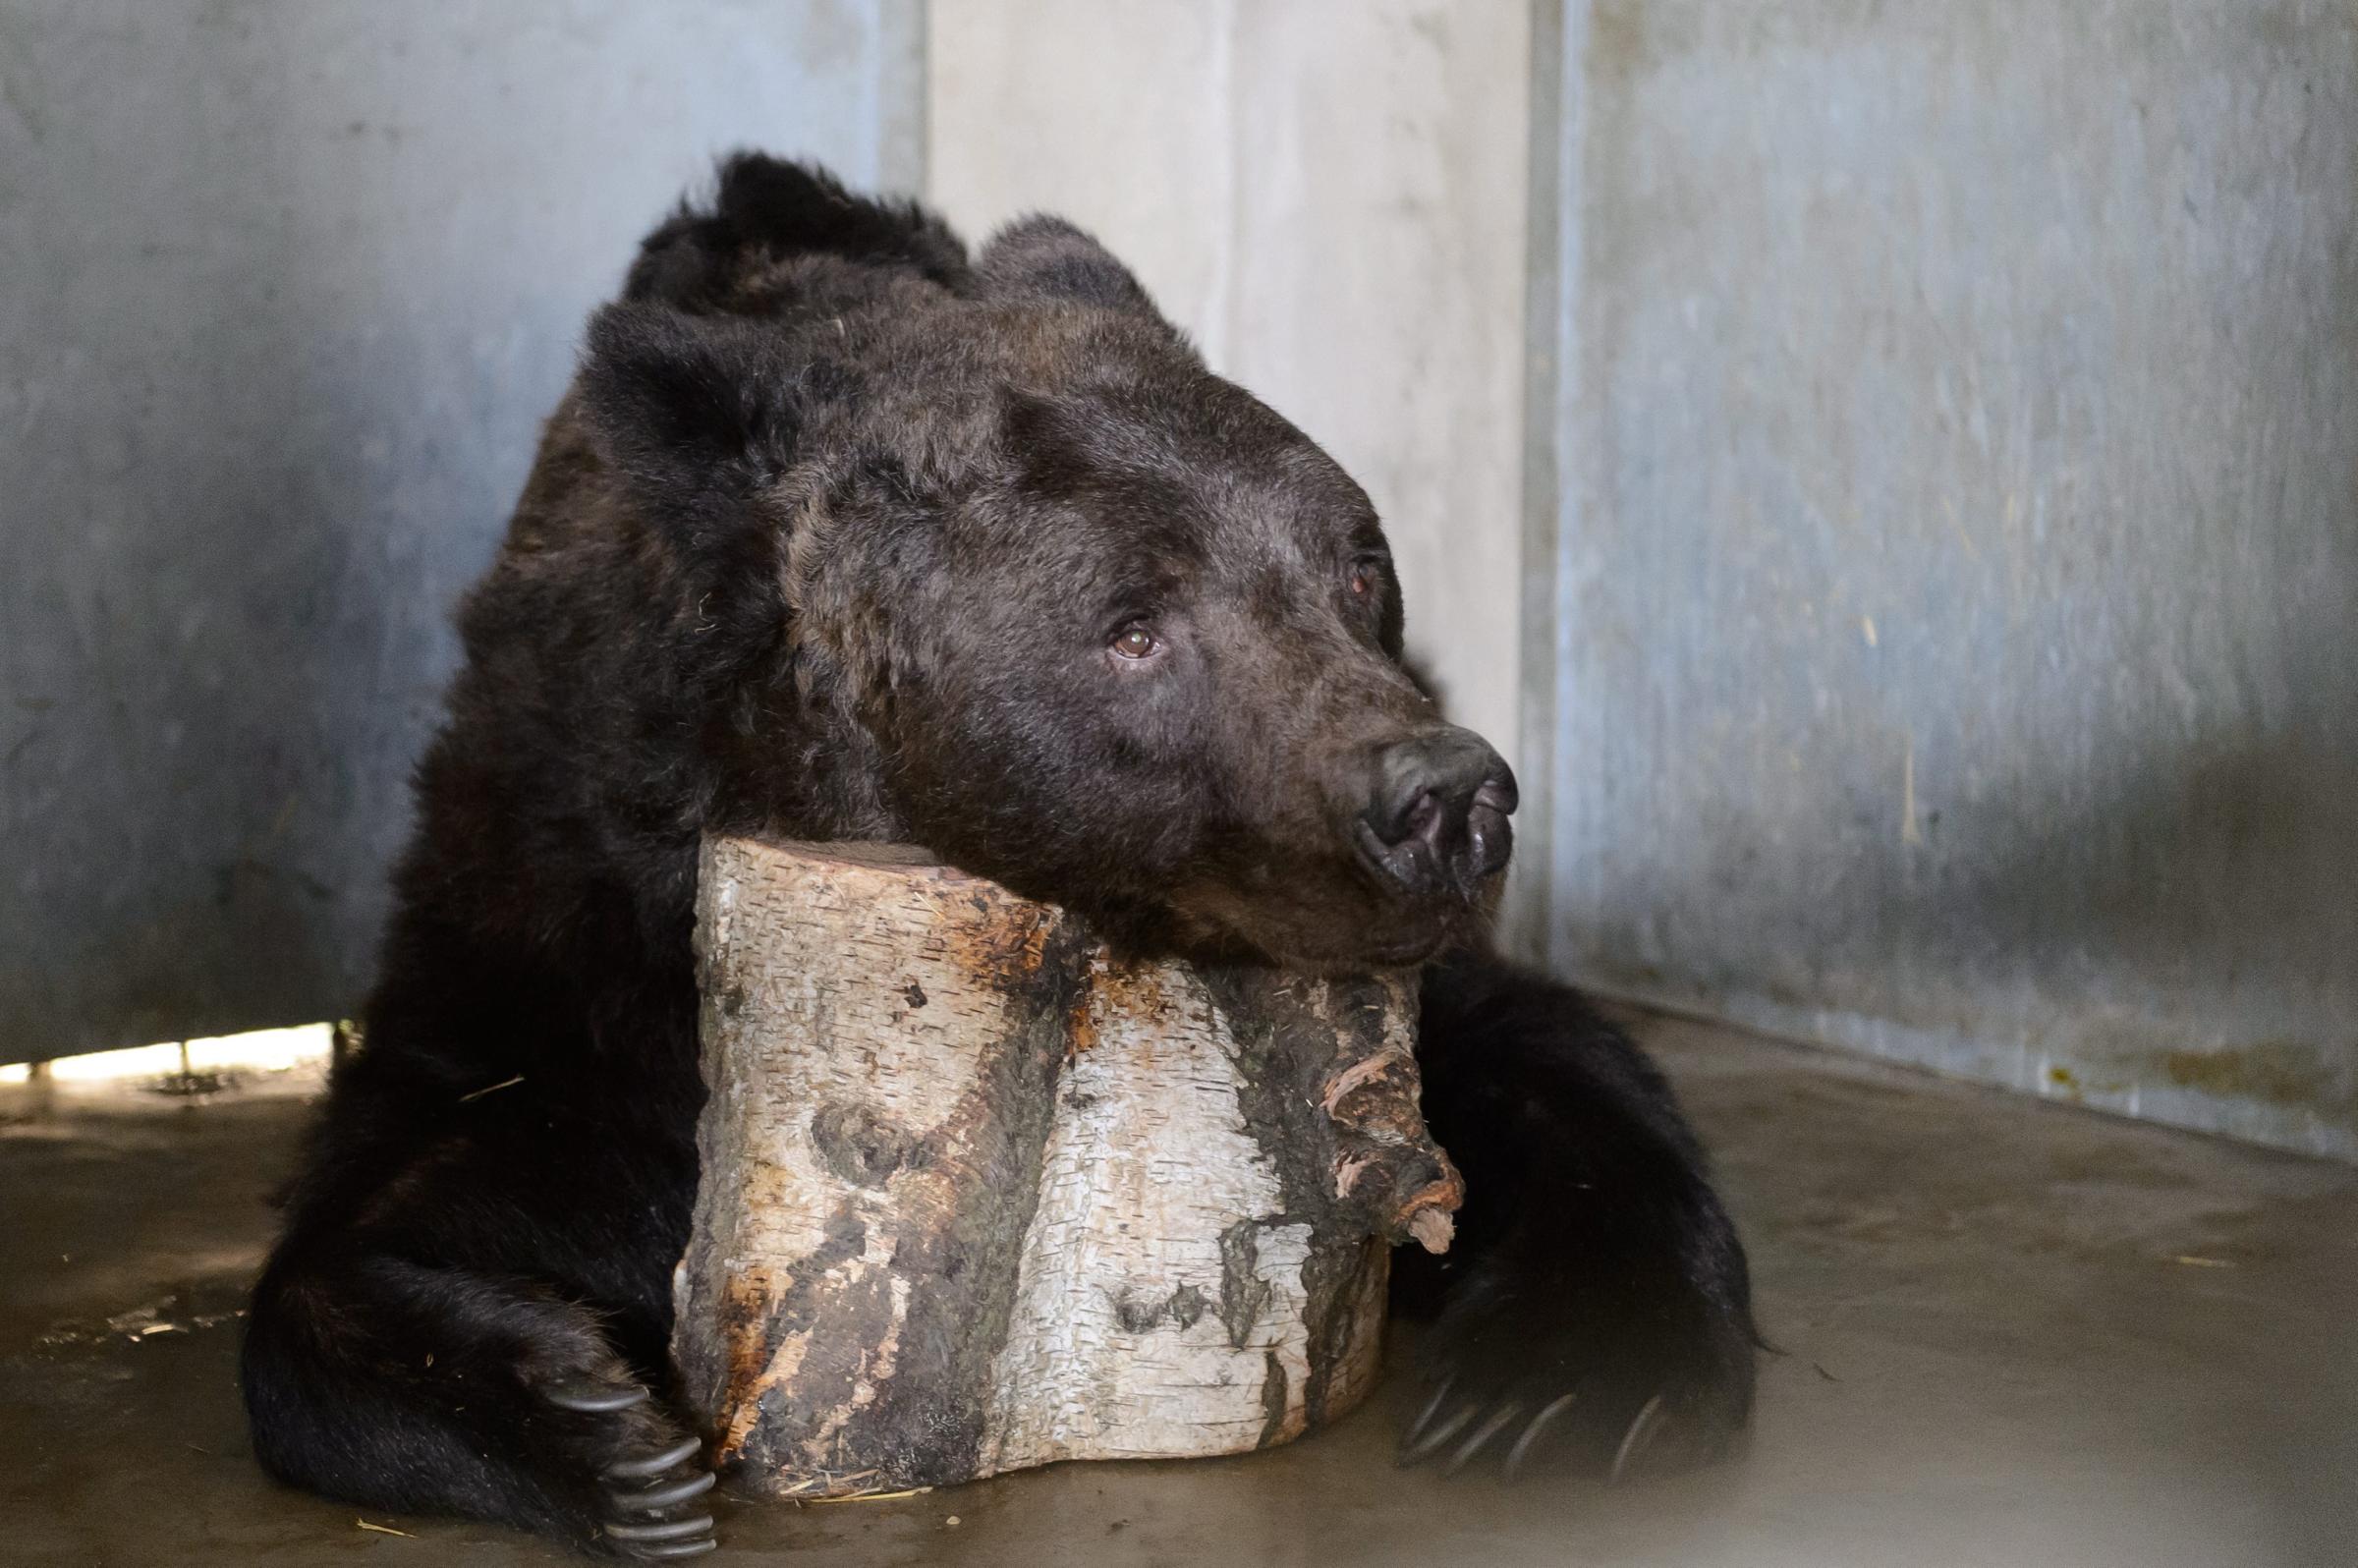 Misha, a brown bear waits for his first dental treatment in his enclosure at the Poznan Zoo in Poznan, Poland on Sept. 5, 2014.